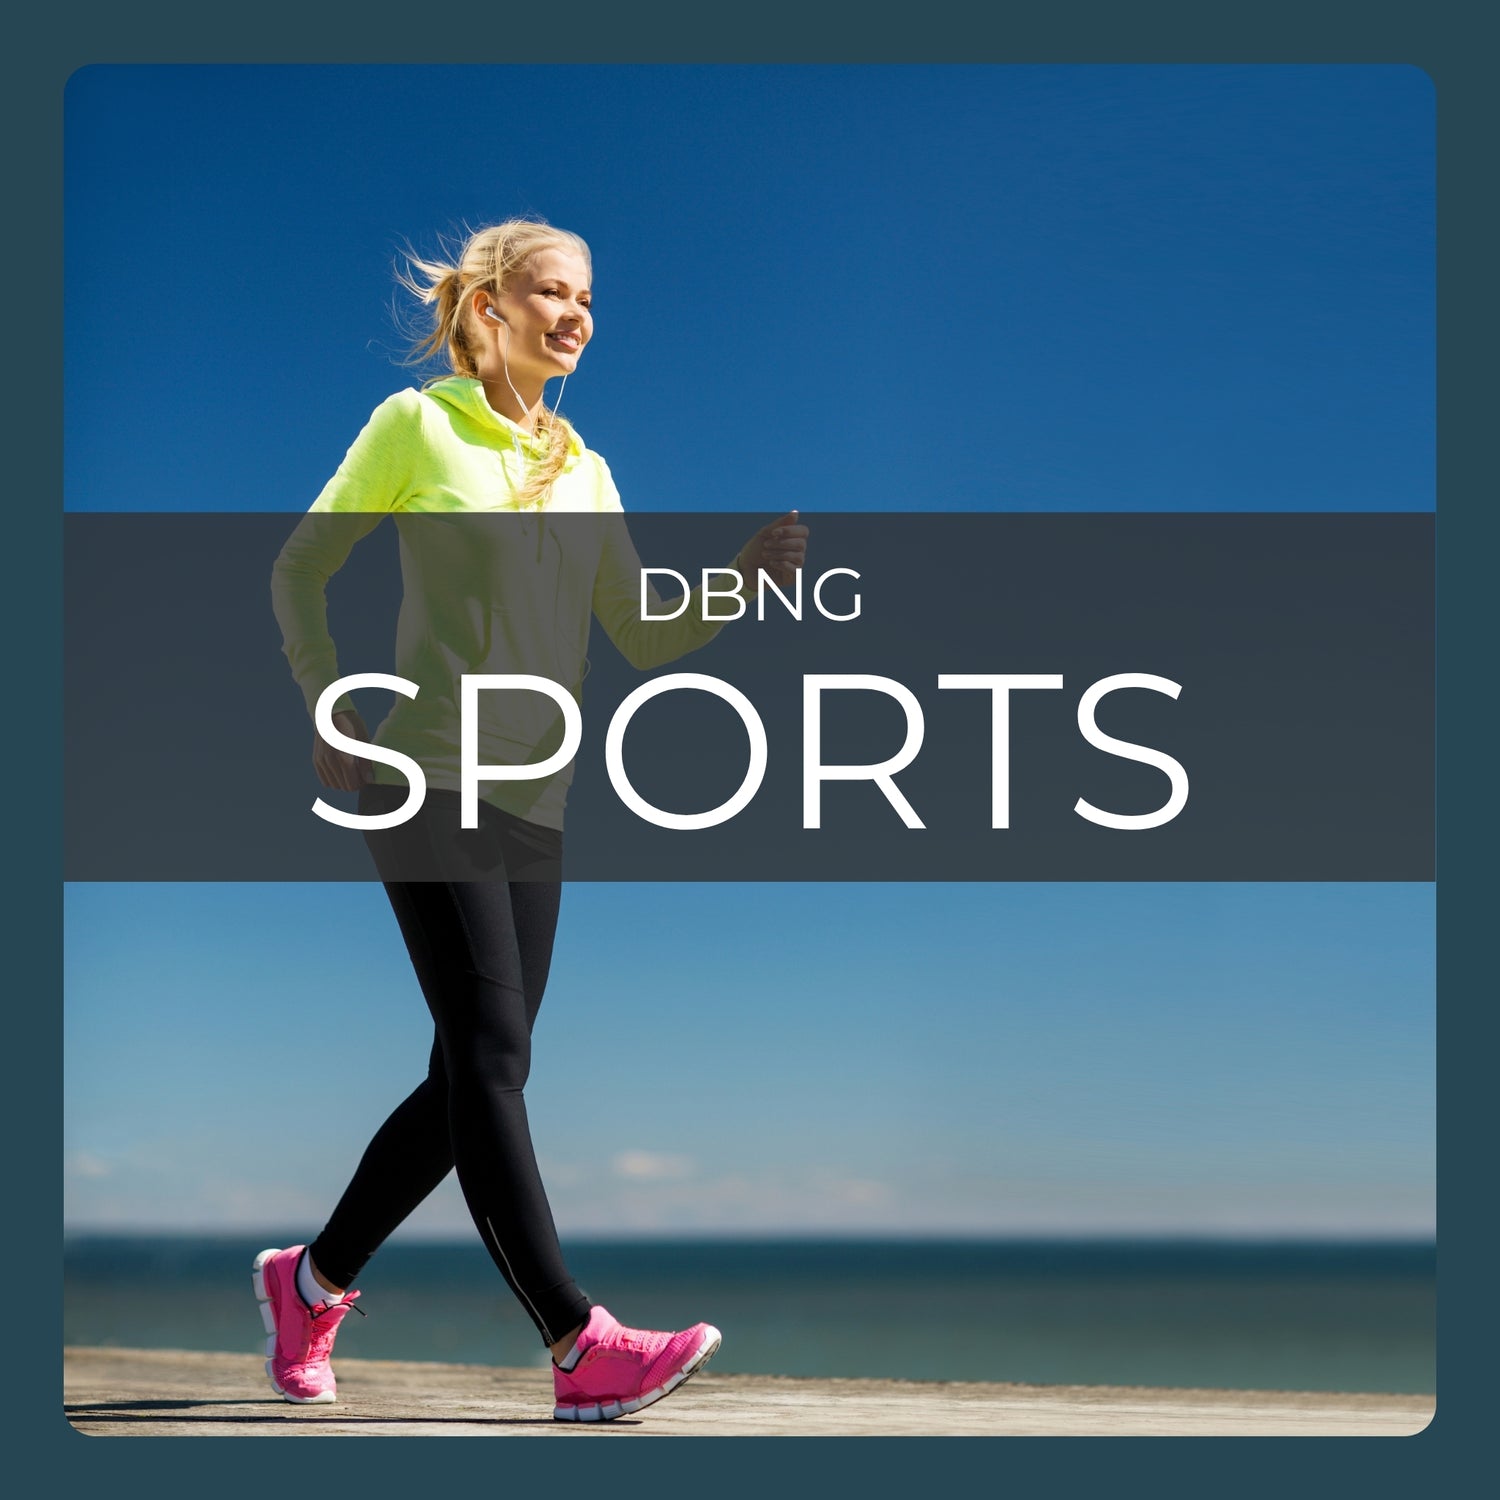 DBNG Sports